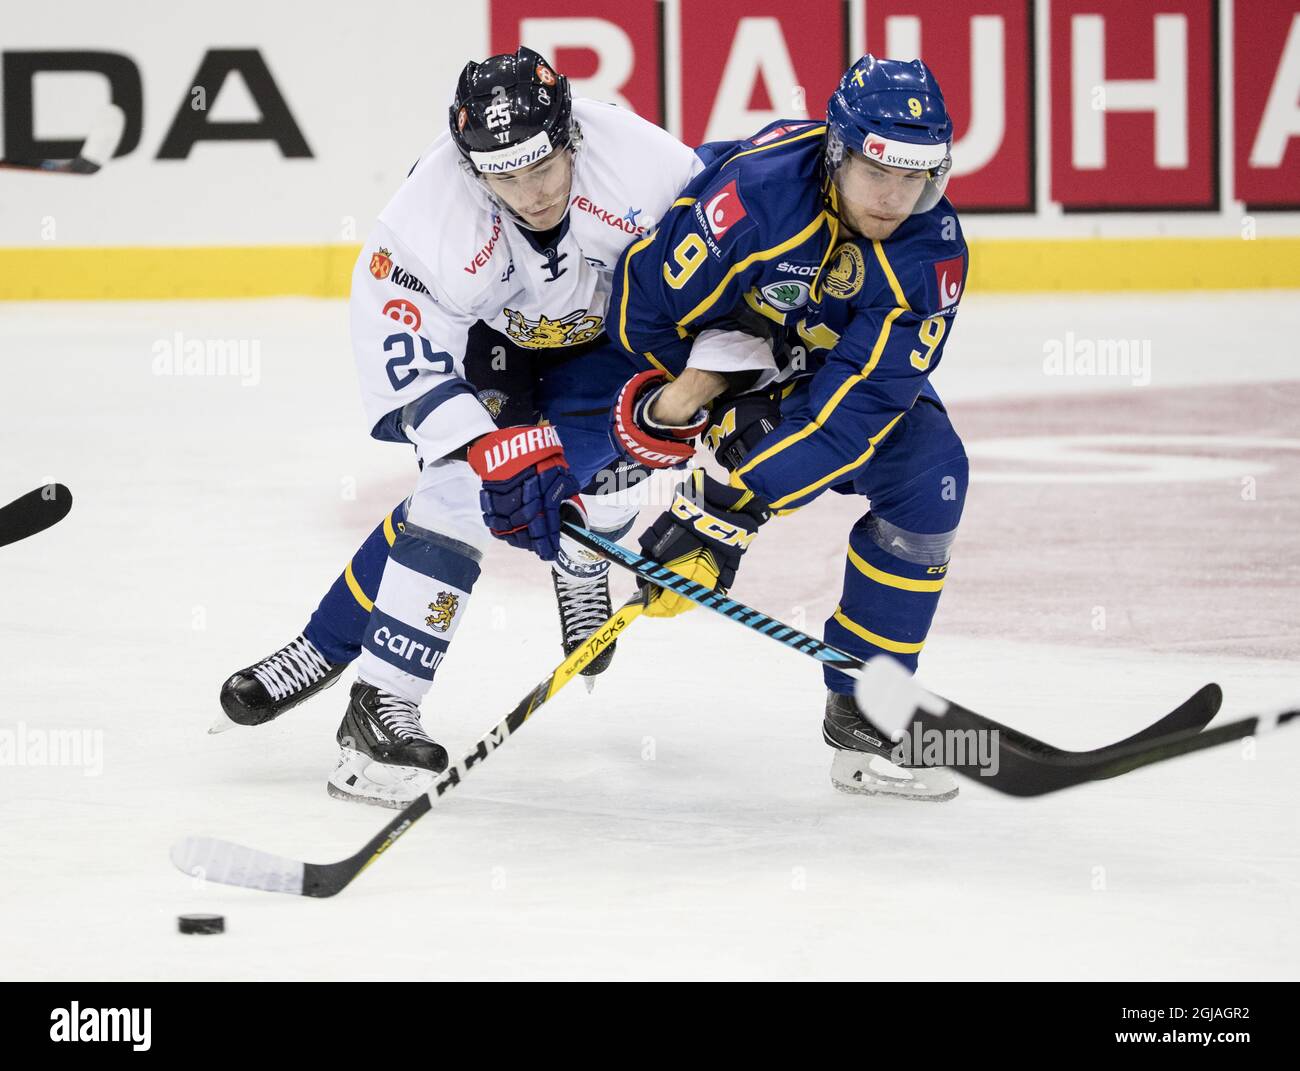 GOTEBORG 2017-02-12 Finland's Henrik Haapala (L) and Sweden's Calle RosÃ©n (R) during the Sweden Hockey Games match Sweden vs Finland at the Scandinavium Arena in Goteborg, Sweden, February 12, 2017. Photo: Bjorn Larsson Rosvall / TT / ** SWEDEN OUT ** Stock Photo